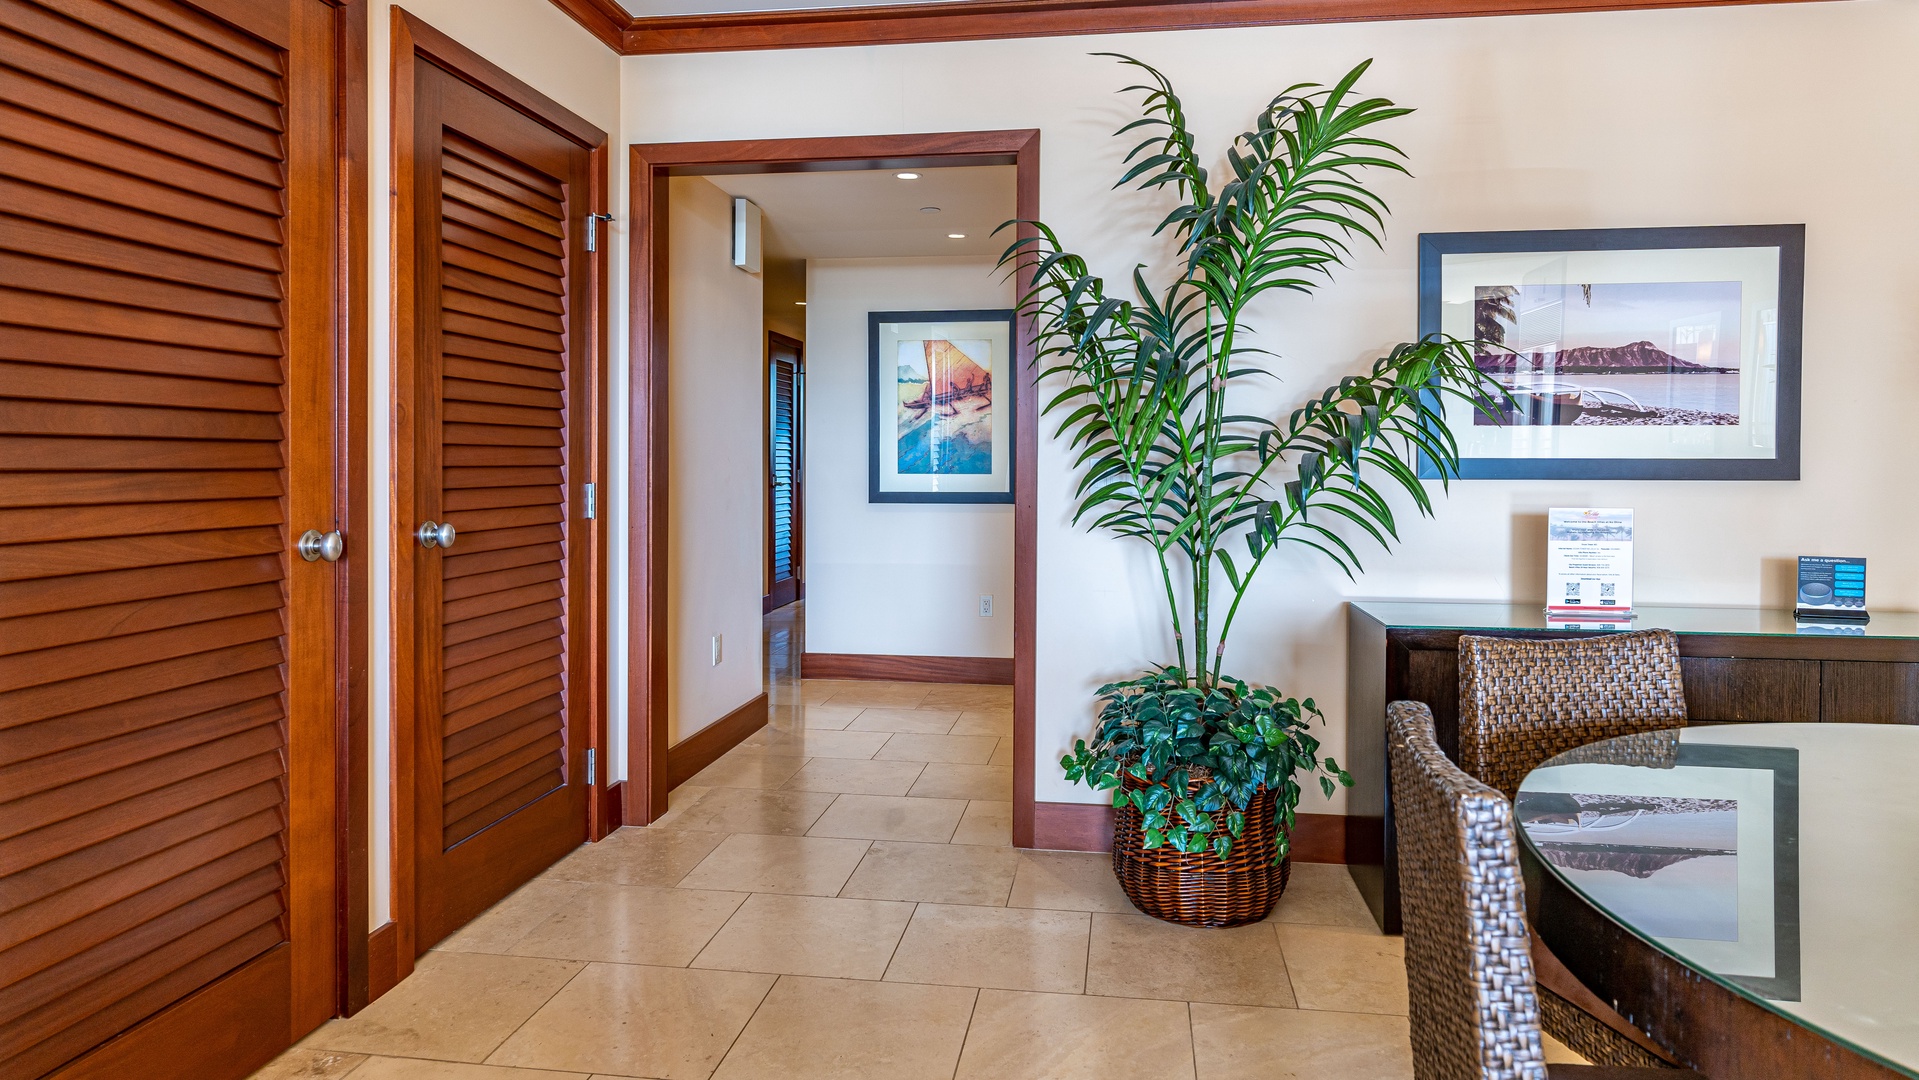 Kapolei Vacation Rentals, Ko Olina Beach Villas O401 - Island time and care free days in your own space.